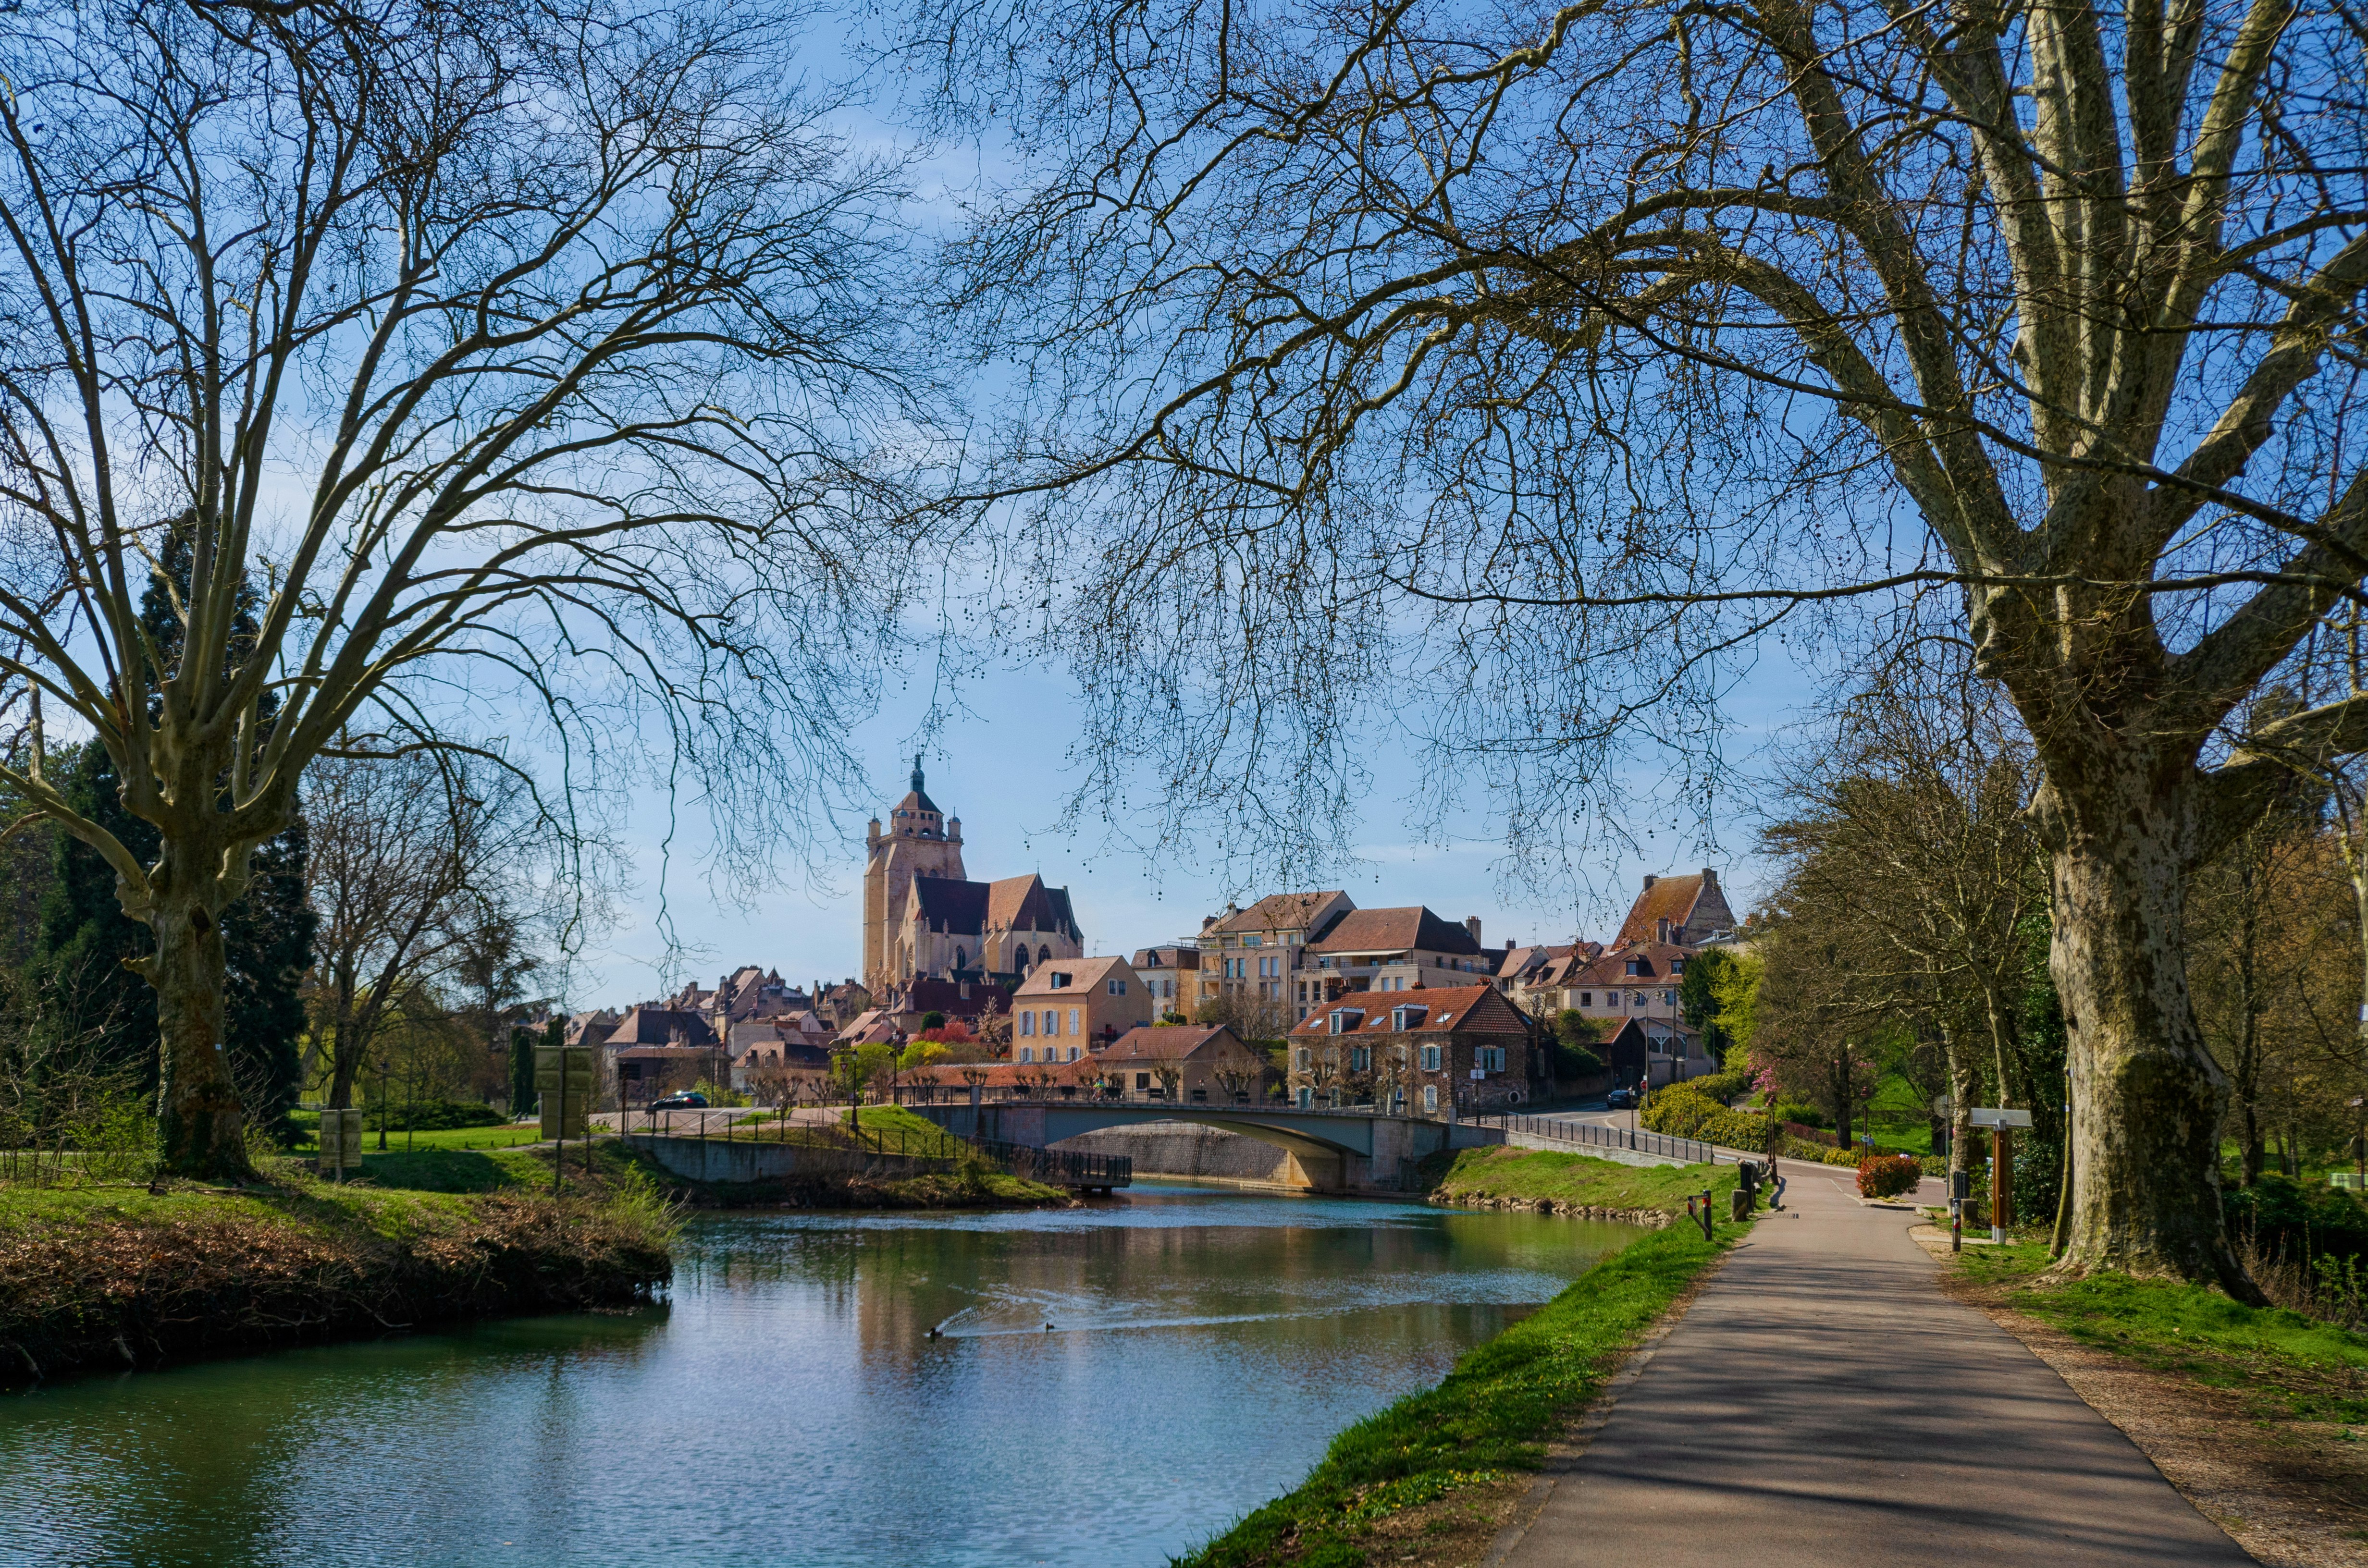 A view of the old French town of Dole. In the foreground is a water canal with walkways and trees. V